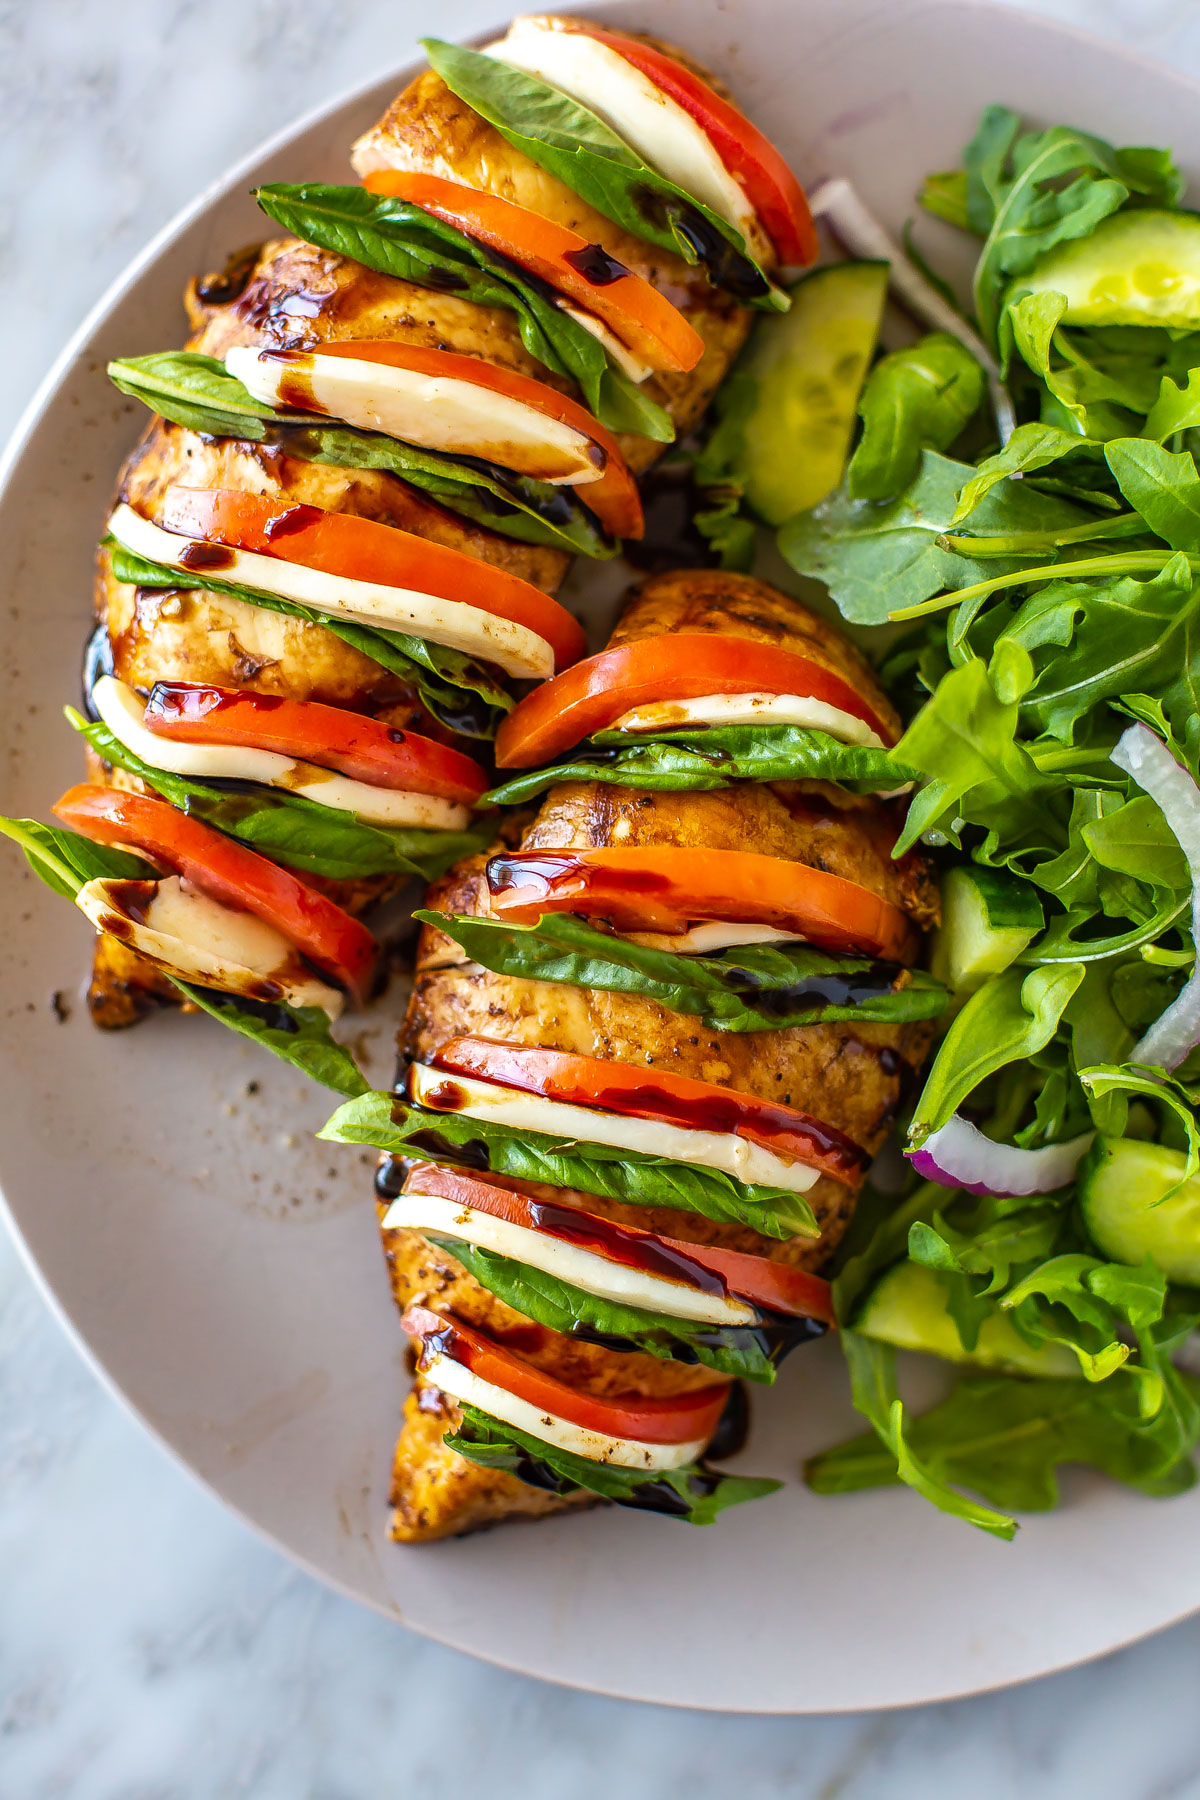 A close-up of a plate with hasselback caprese chicken with a side salad.